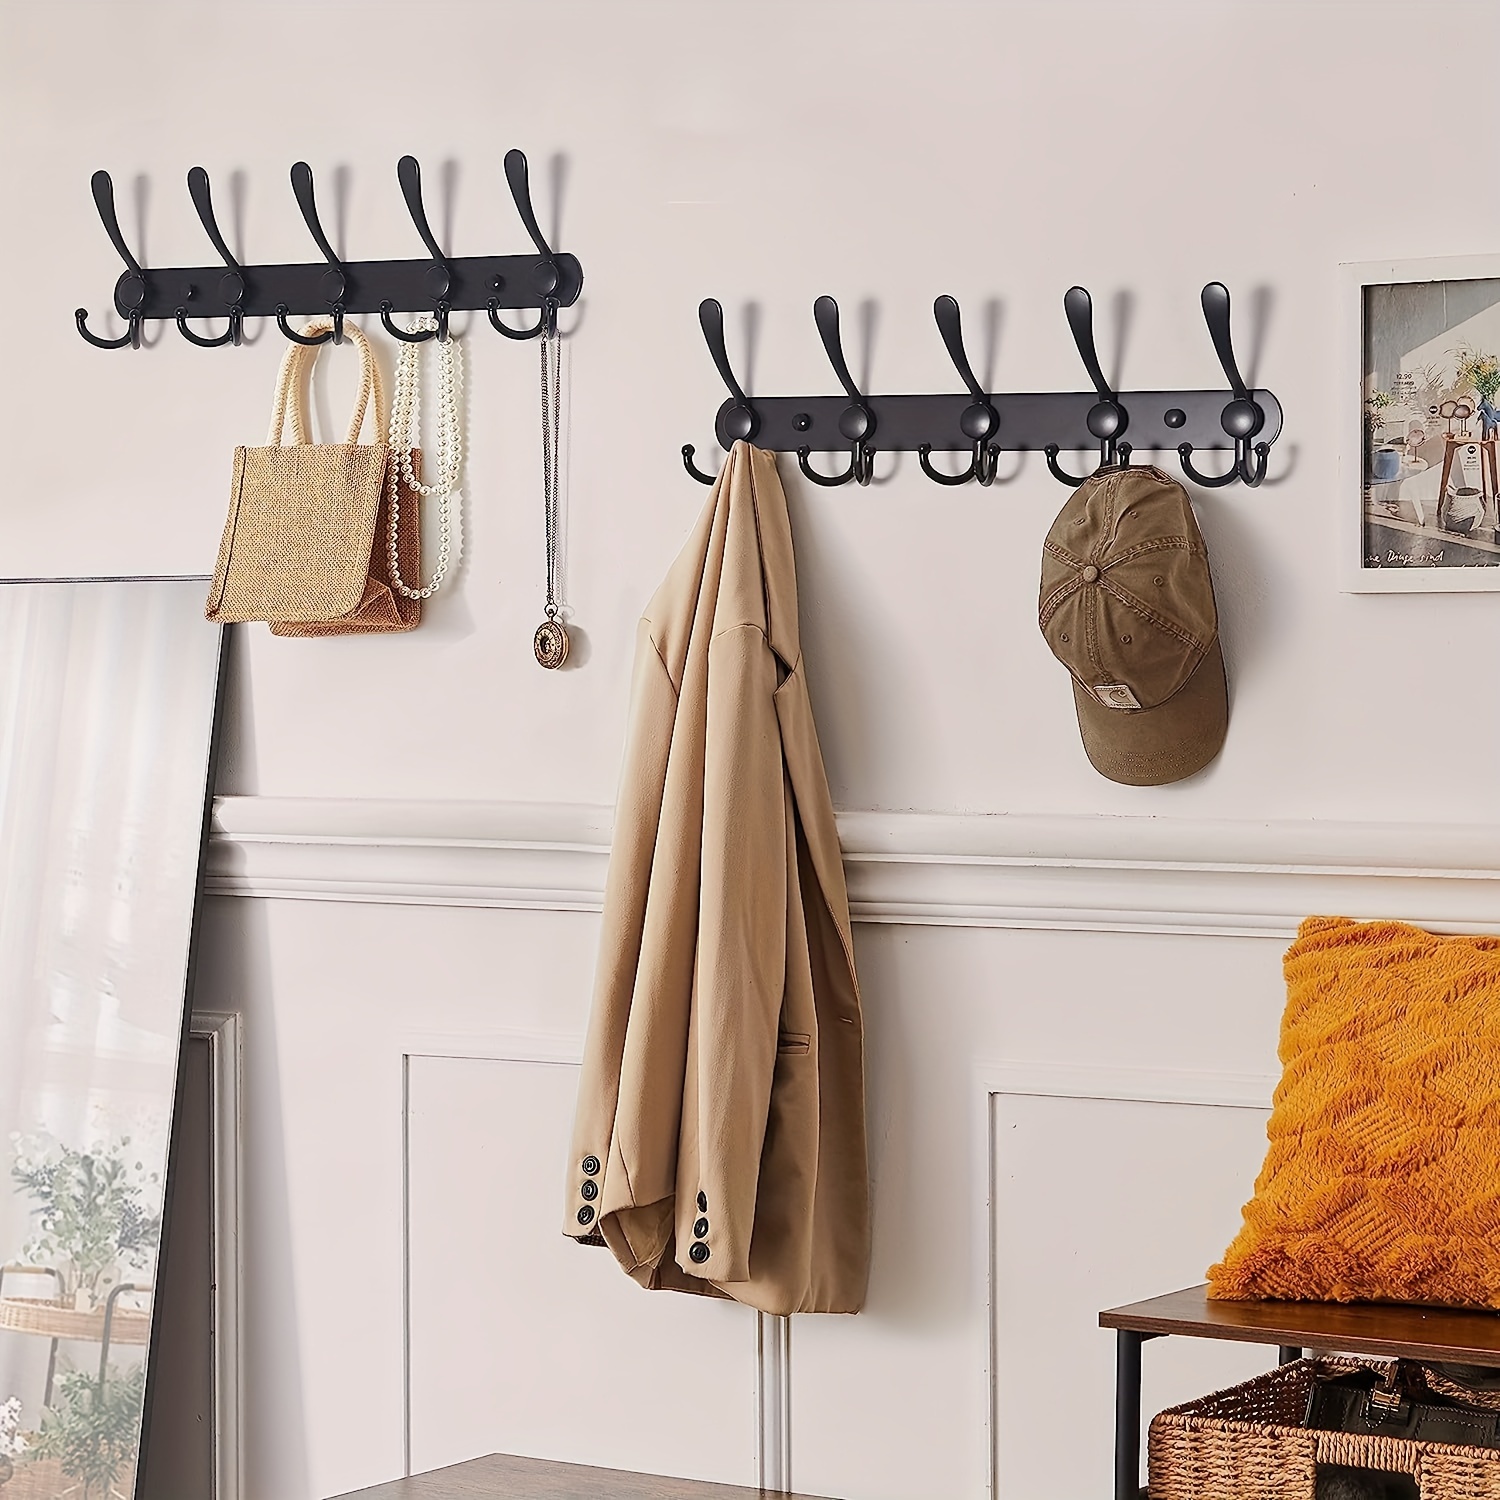 2pcs Coat Hooks For Walls - Stainless Steel Rack, Heavy Duty Wall Mount -  Rust-proof Coat Hanger Wall For Robes And Clothes